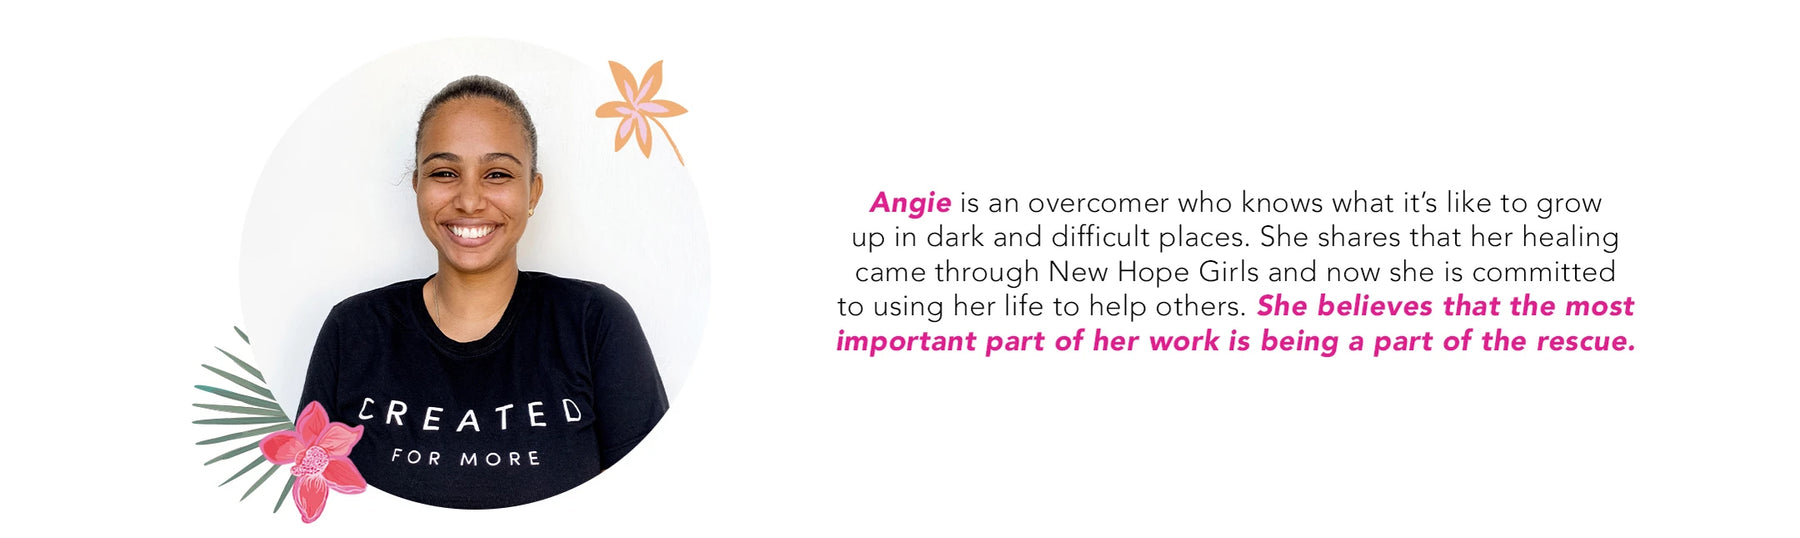 Angie is an overcomer who knows what it’s like to grow up in dark and difficult places. She shares that her healing came through New Hope Girls and now she is committed to using her life to help others. She believes that the most important part of her wor